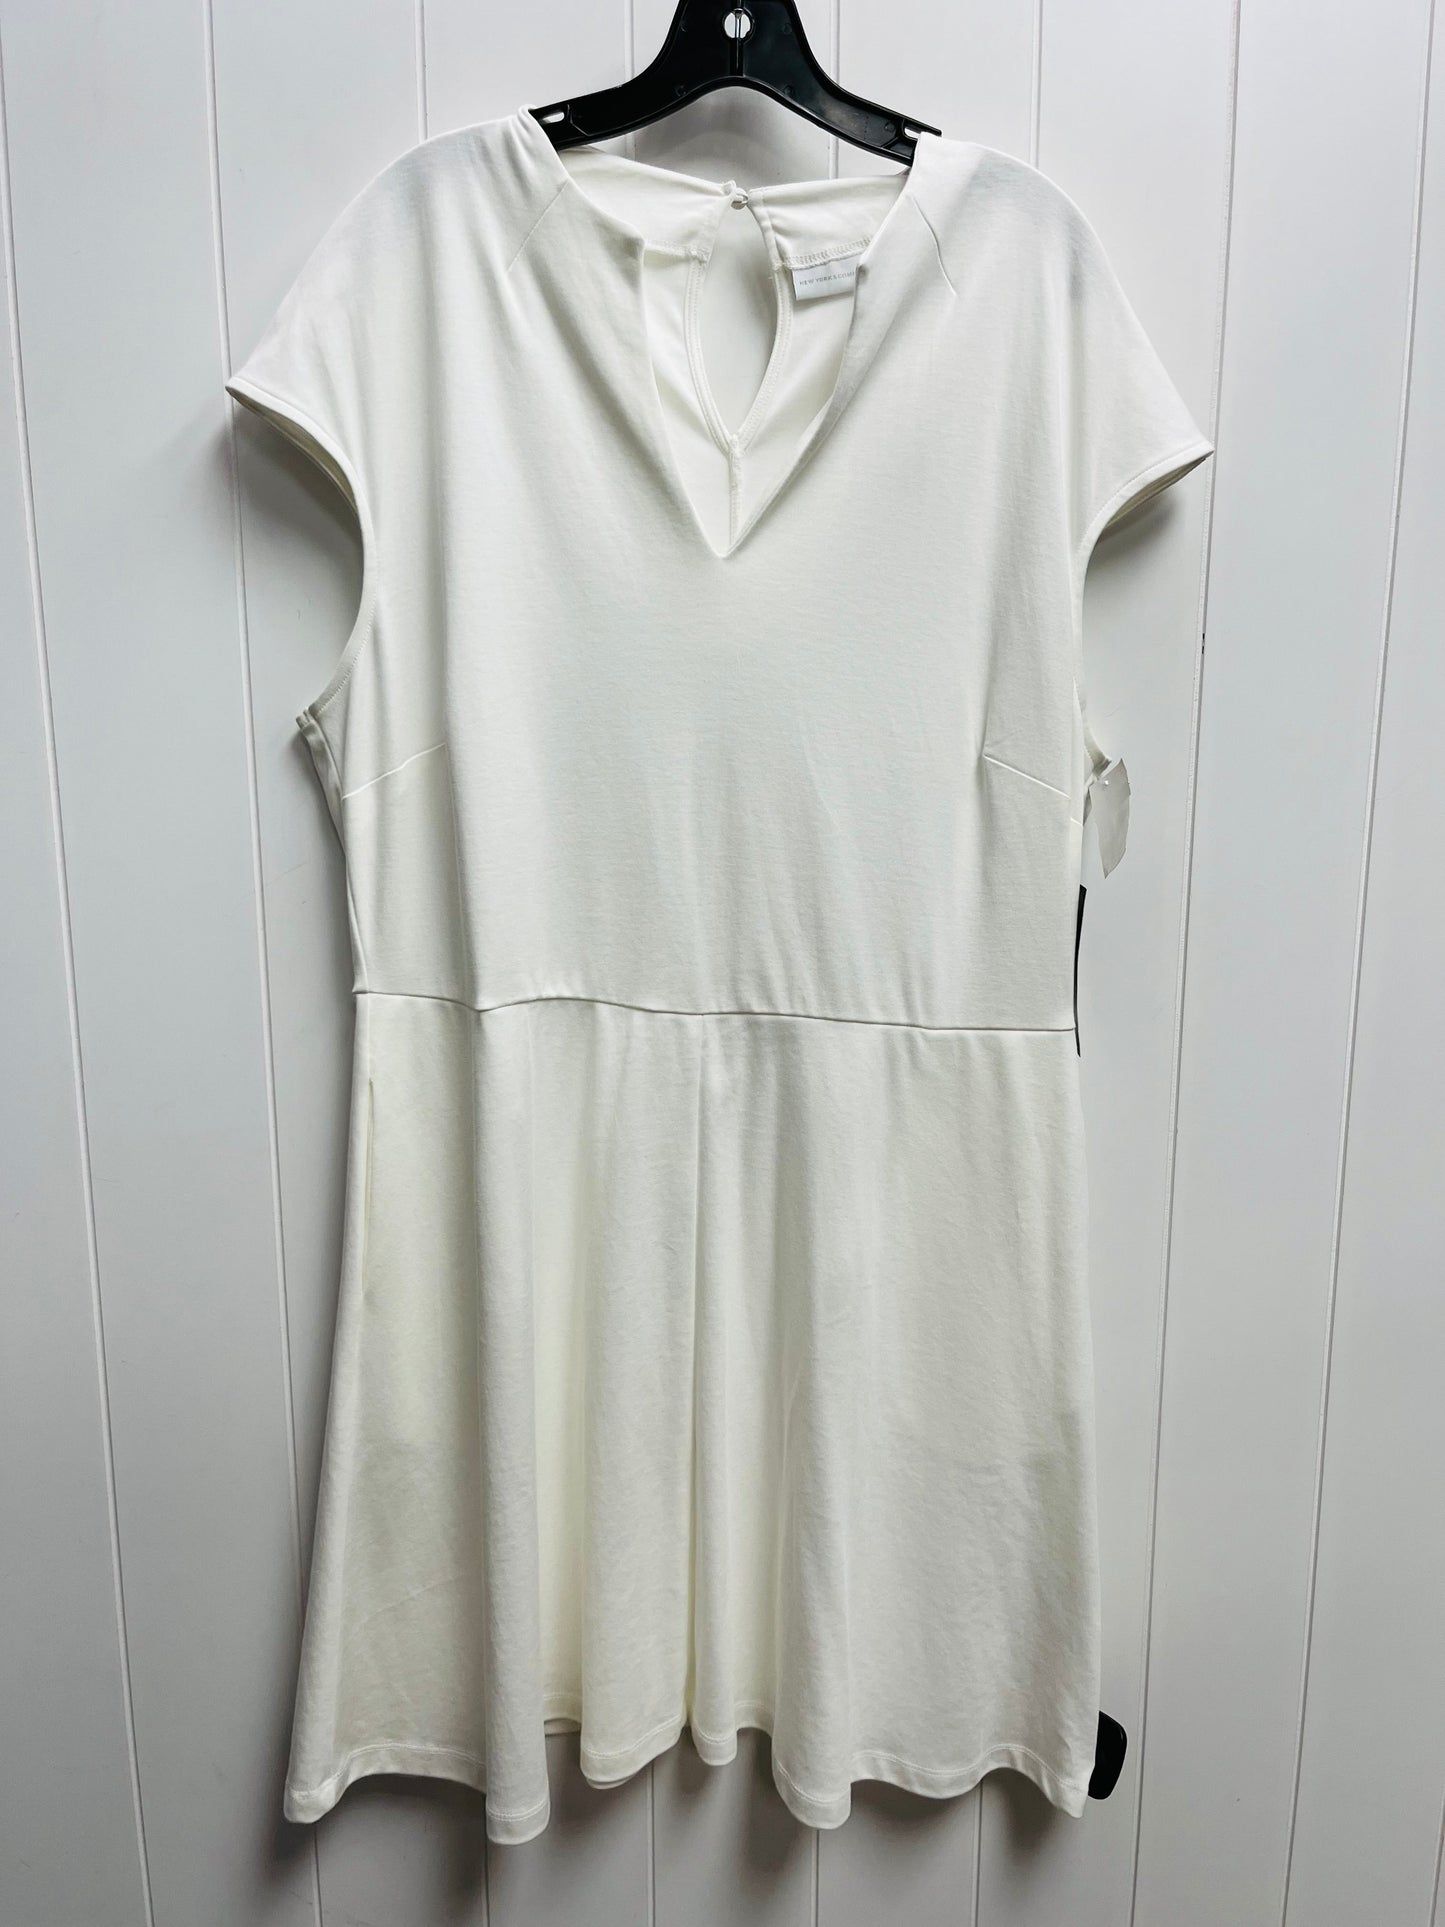 White Dress Work New York And Co, Size Xl